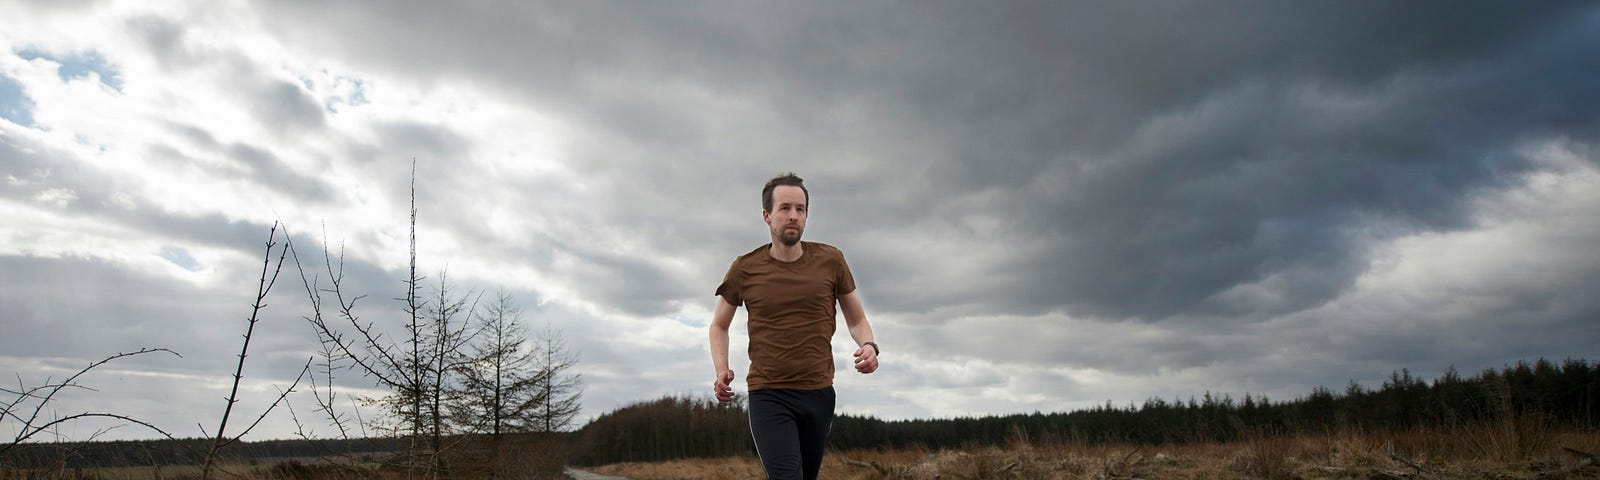 Man running on a dirt road under grey, overcast skies